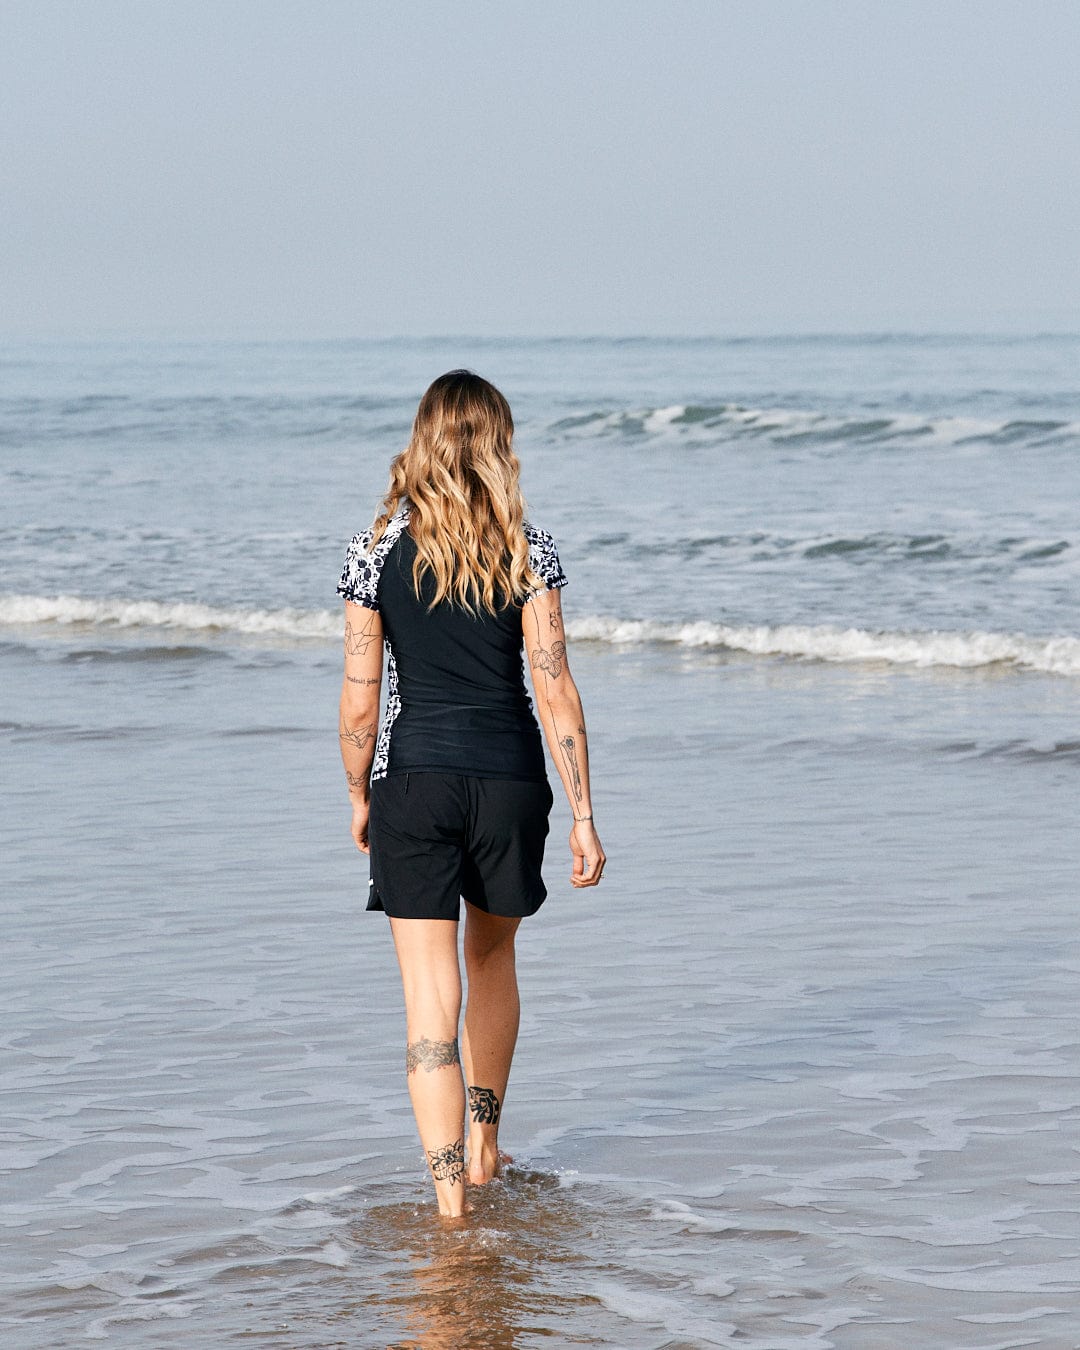 A woman with tattoos walks into the sea, wearing a black outfit with Saltrock Hibiscus - Recycled Womens Short Sleeve Rashvest - Black pattern, viewed from behind.